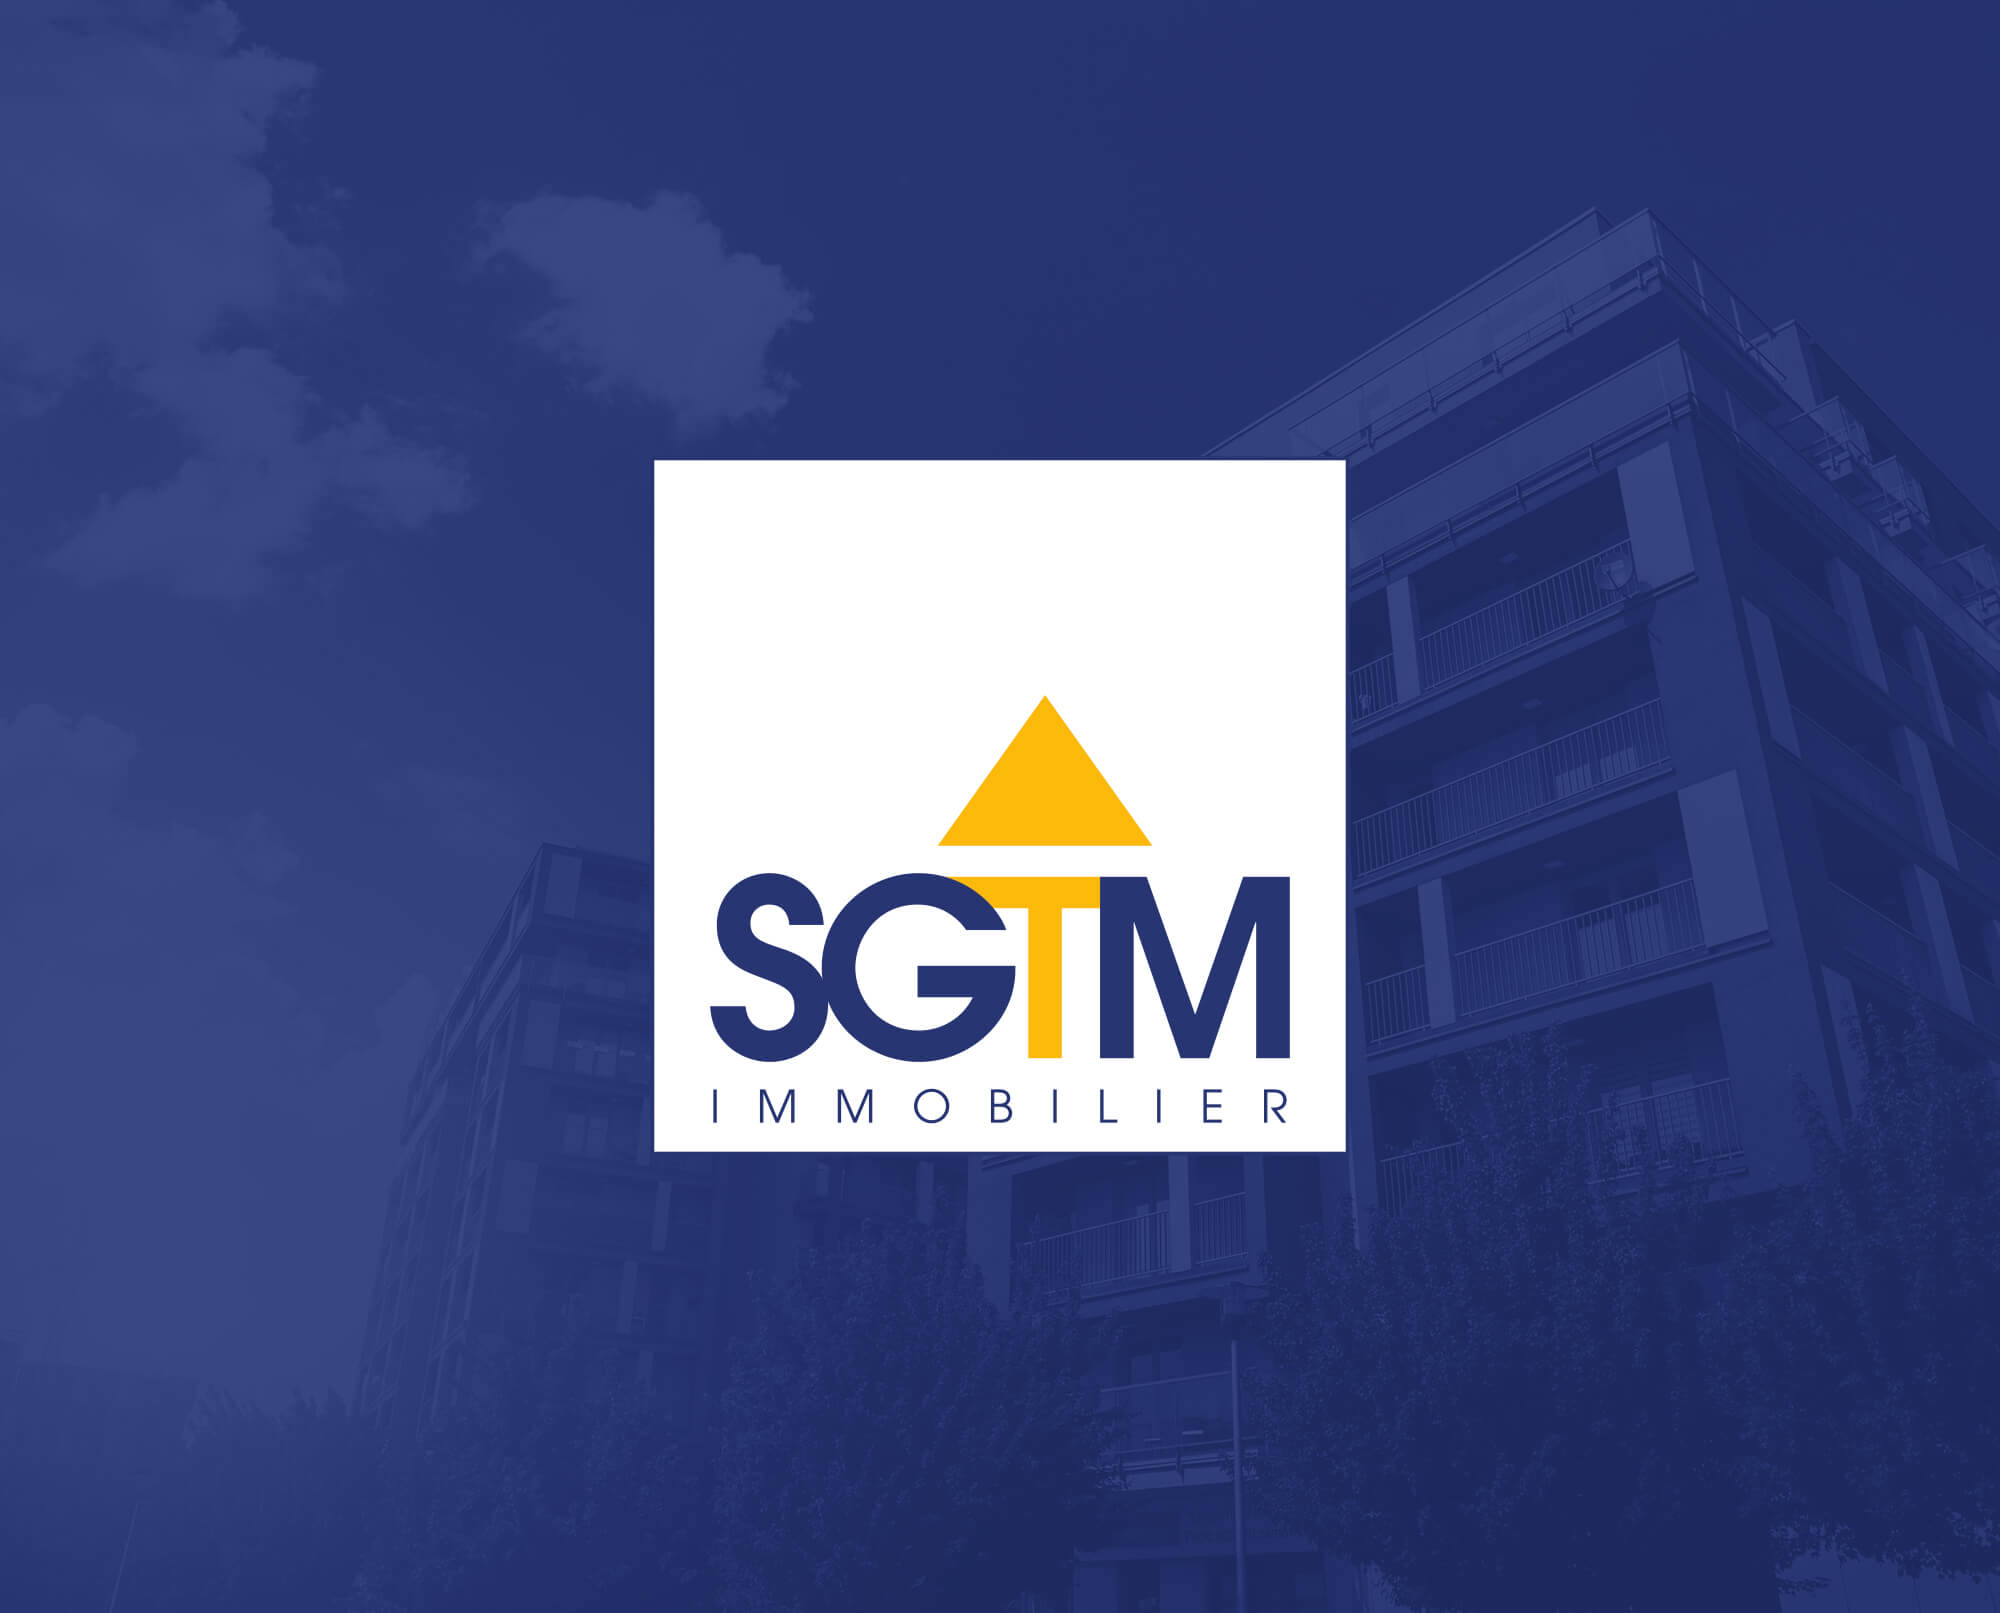 SGTM Immobilier